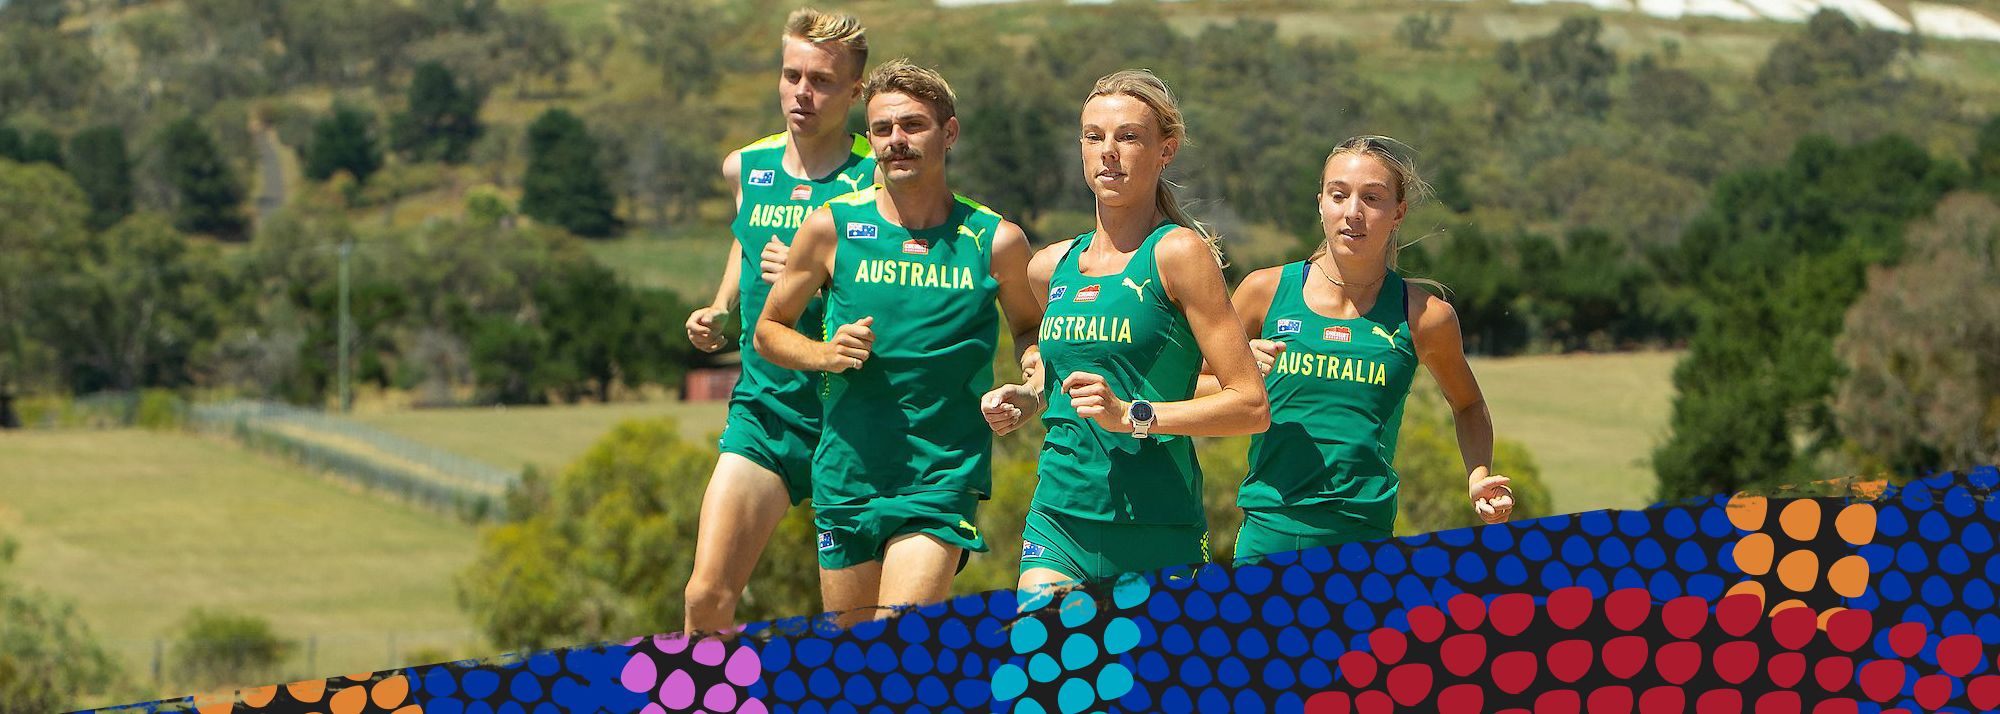 Oliver Hoare, Jessica Hull, Jack Rayner and Rose Davies are among the athletes confirmed for the event in Bathurst